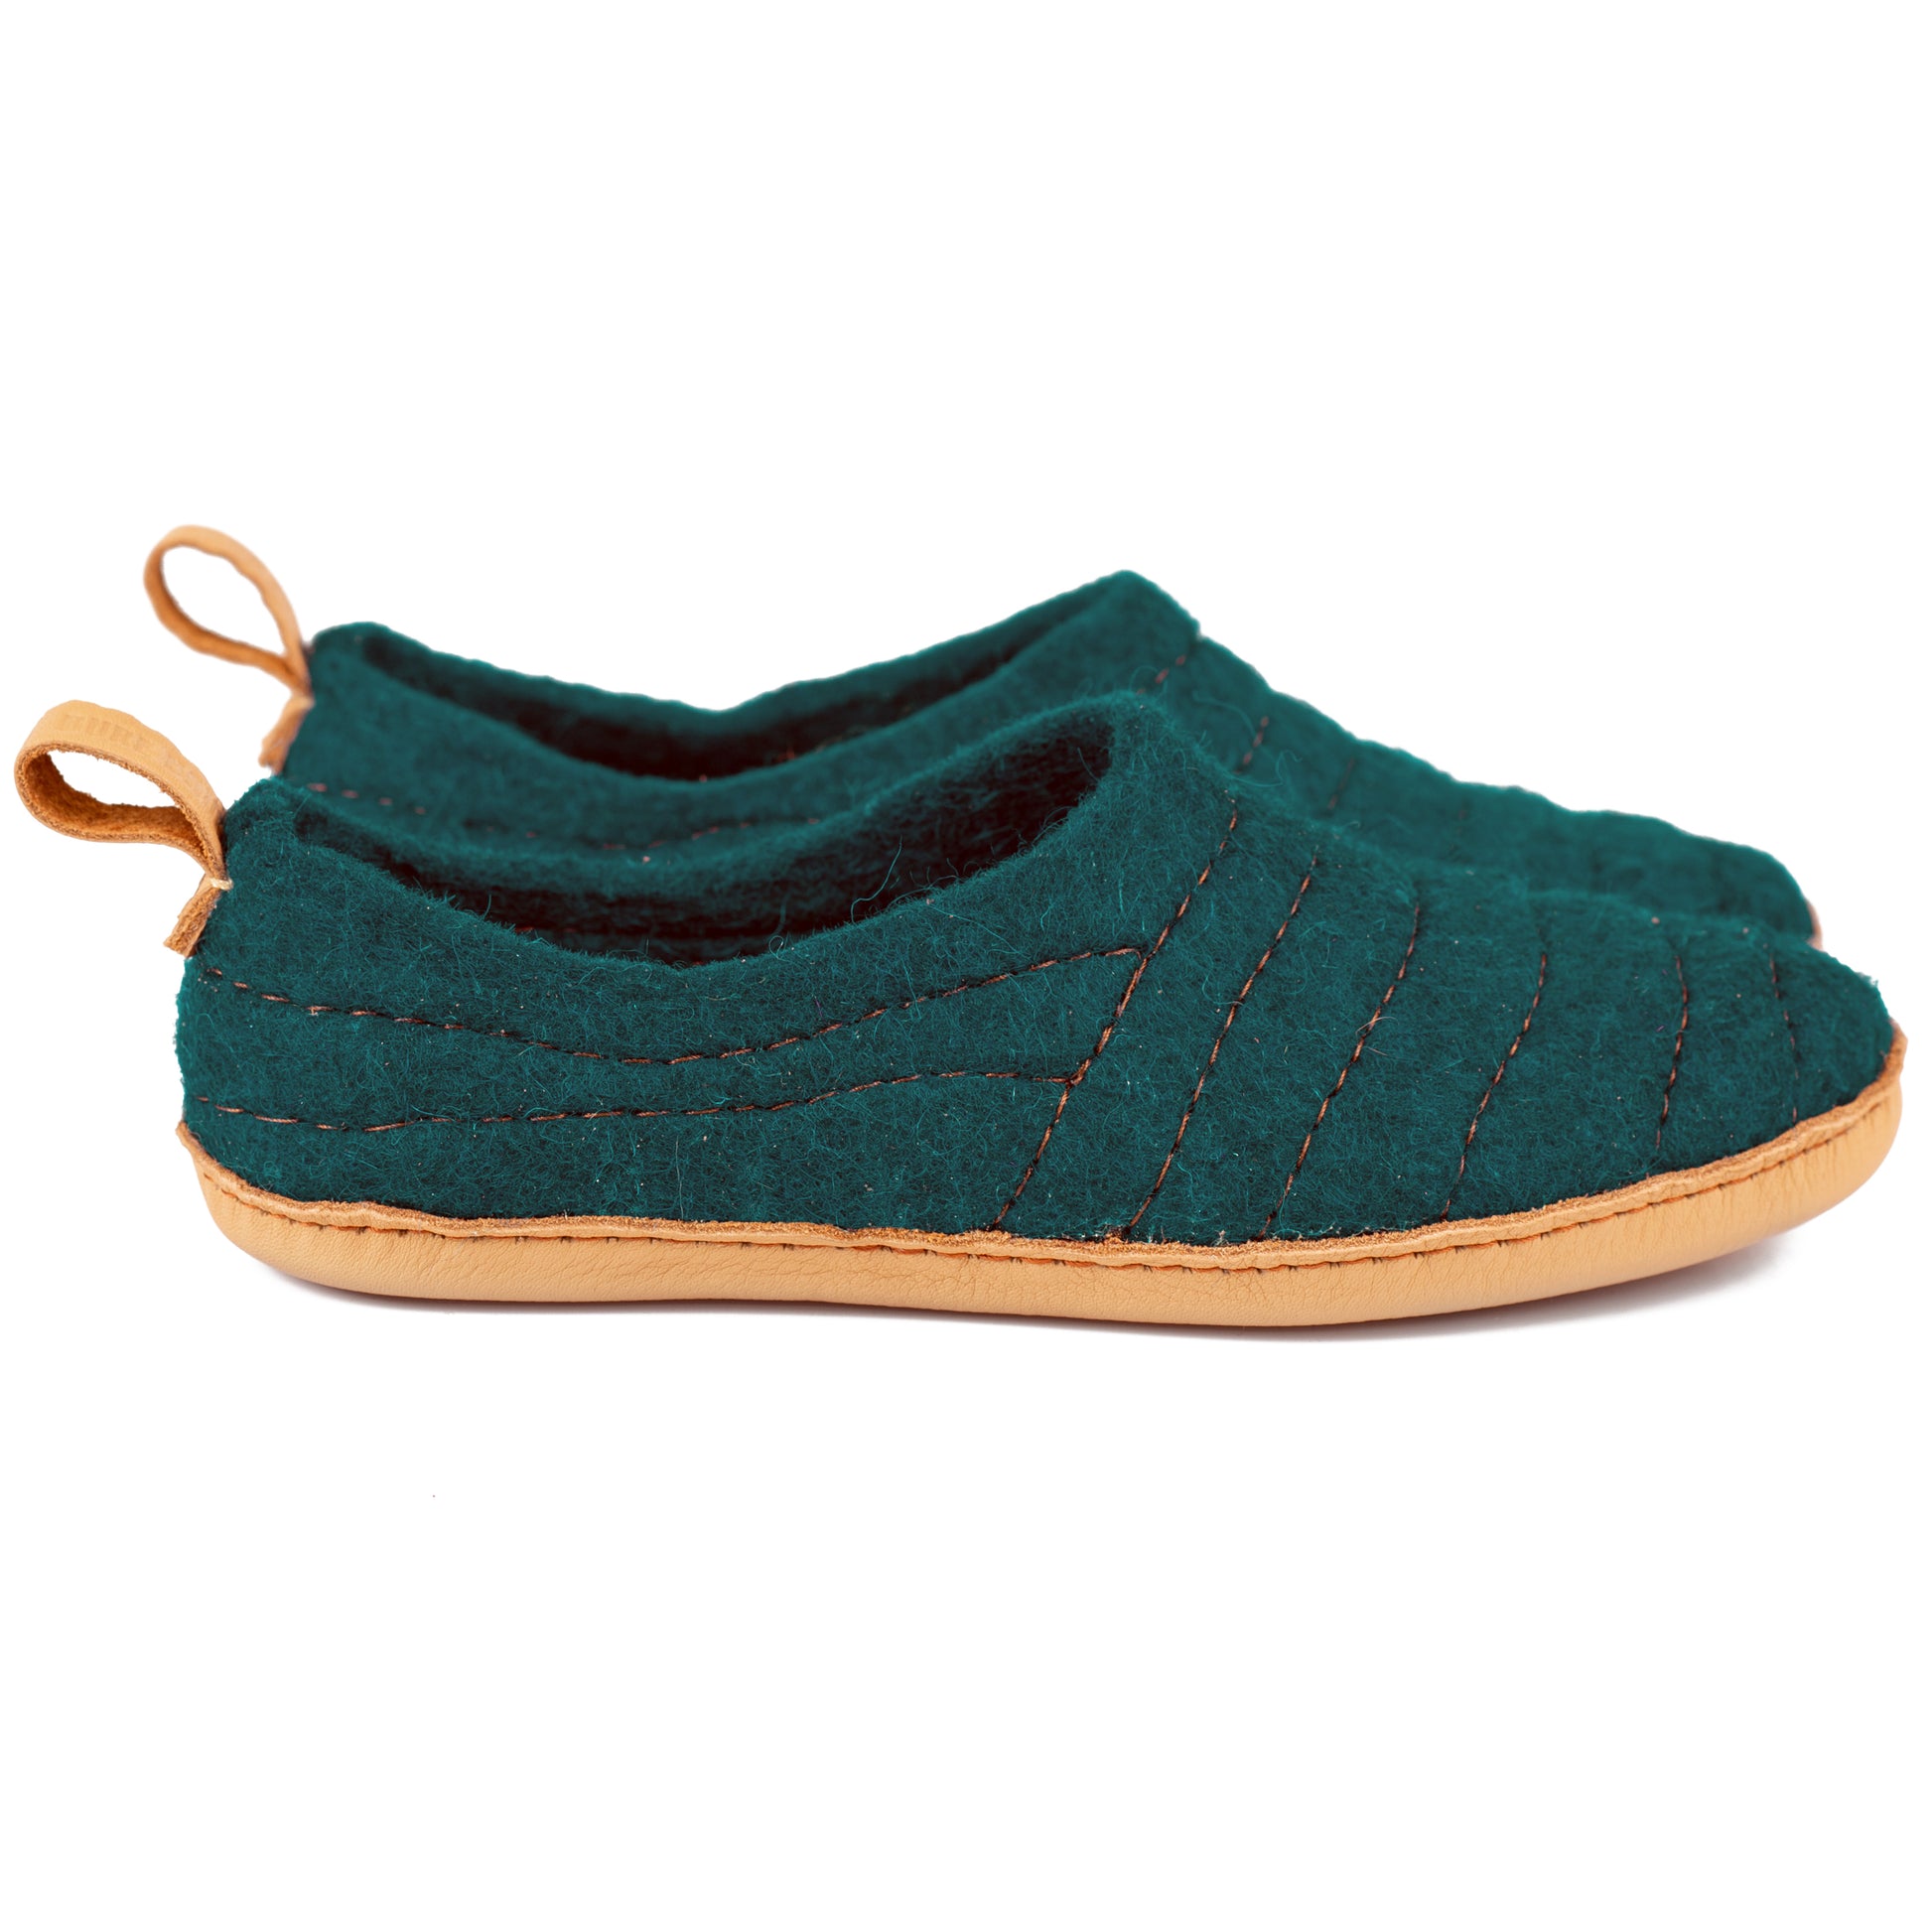 Dark Cyan Cocoon Handmade Felted Wool Slippers for Women with Sturdy Stitching and Recycled Leather Loops